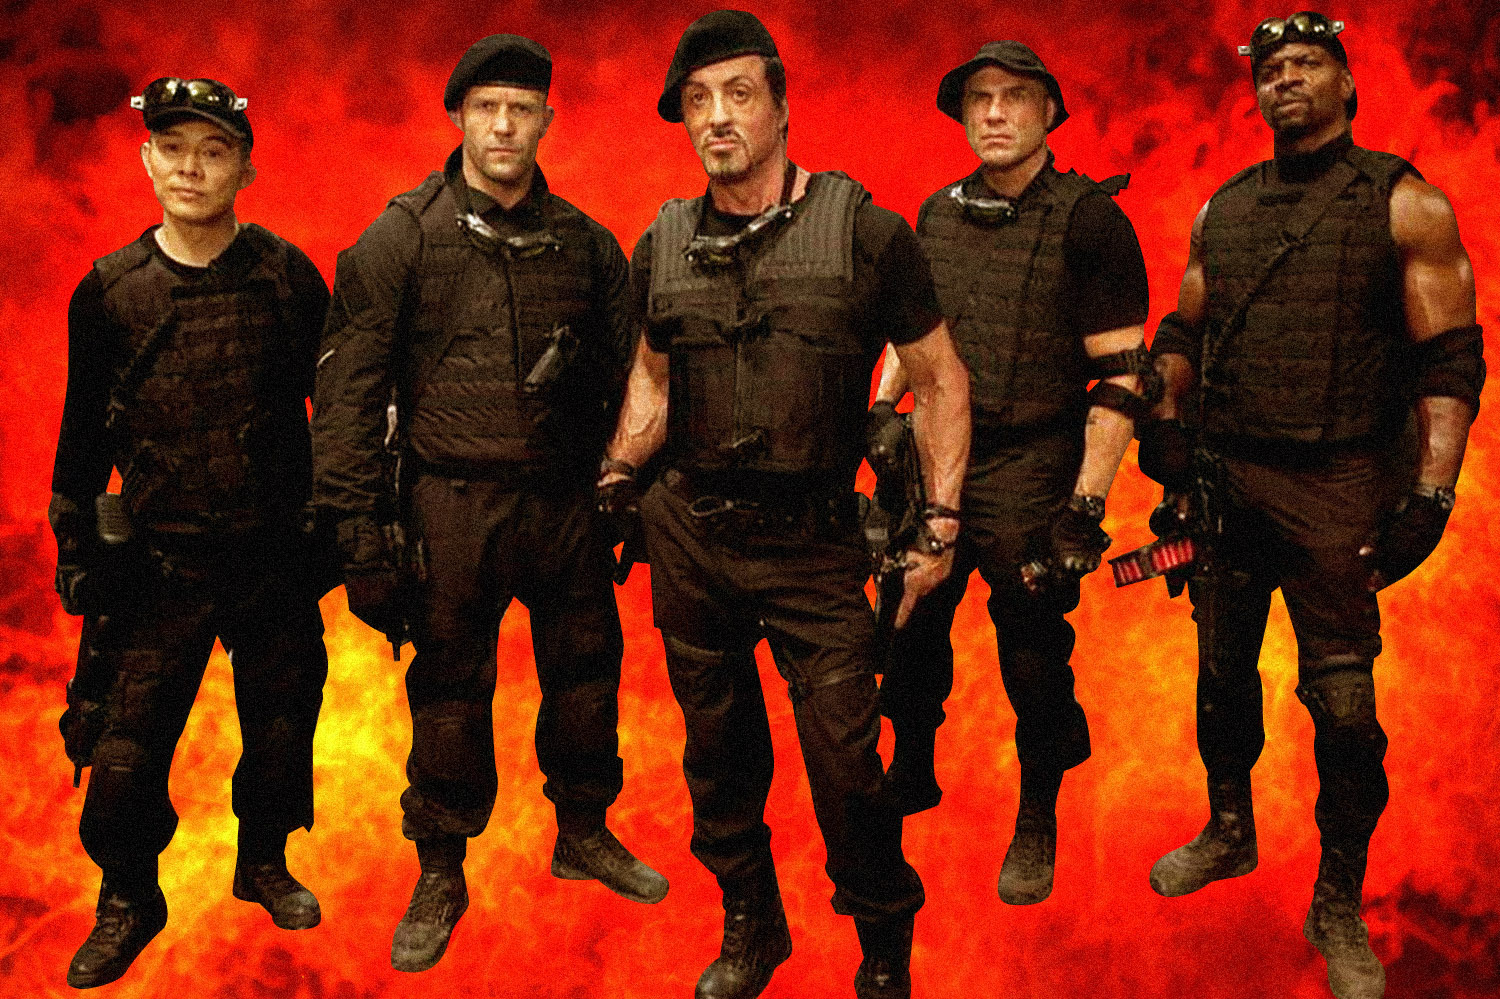 "The Expendables" Proved That a Nostalgic Old-Guy Action Flex Could Work